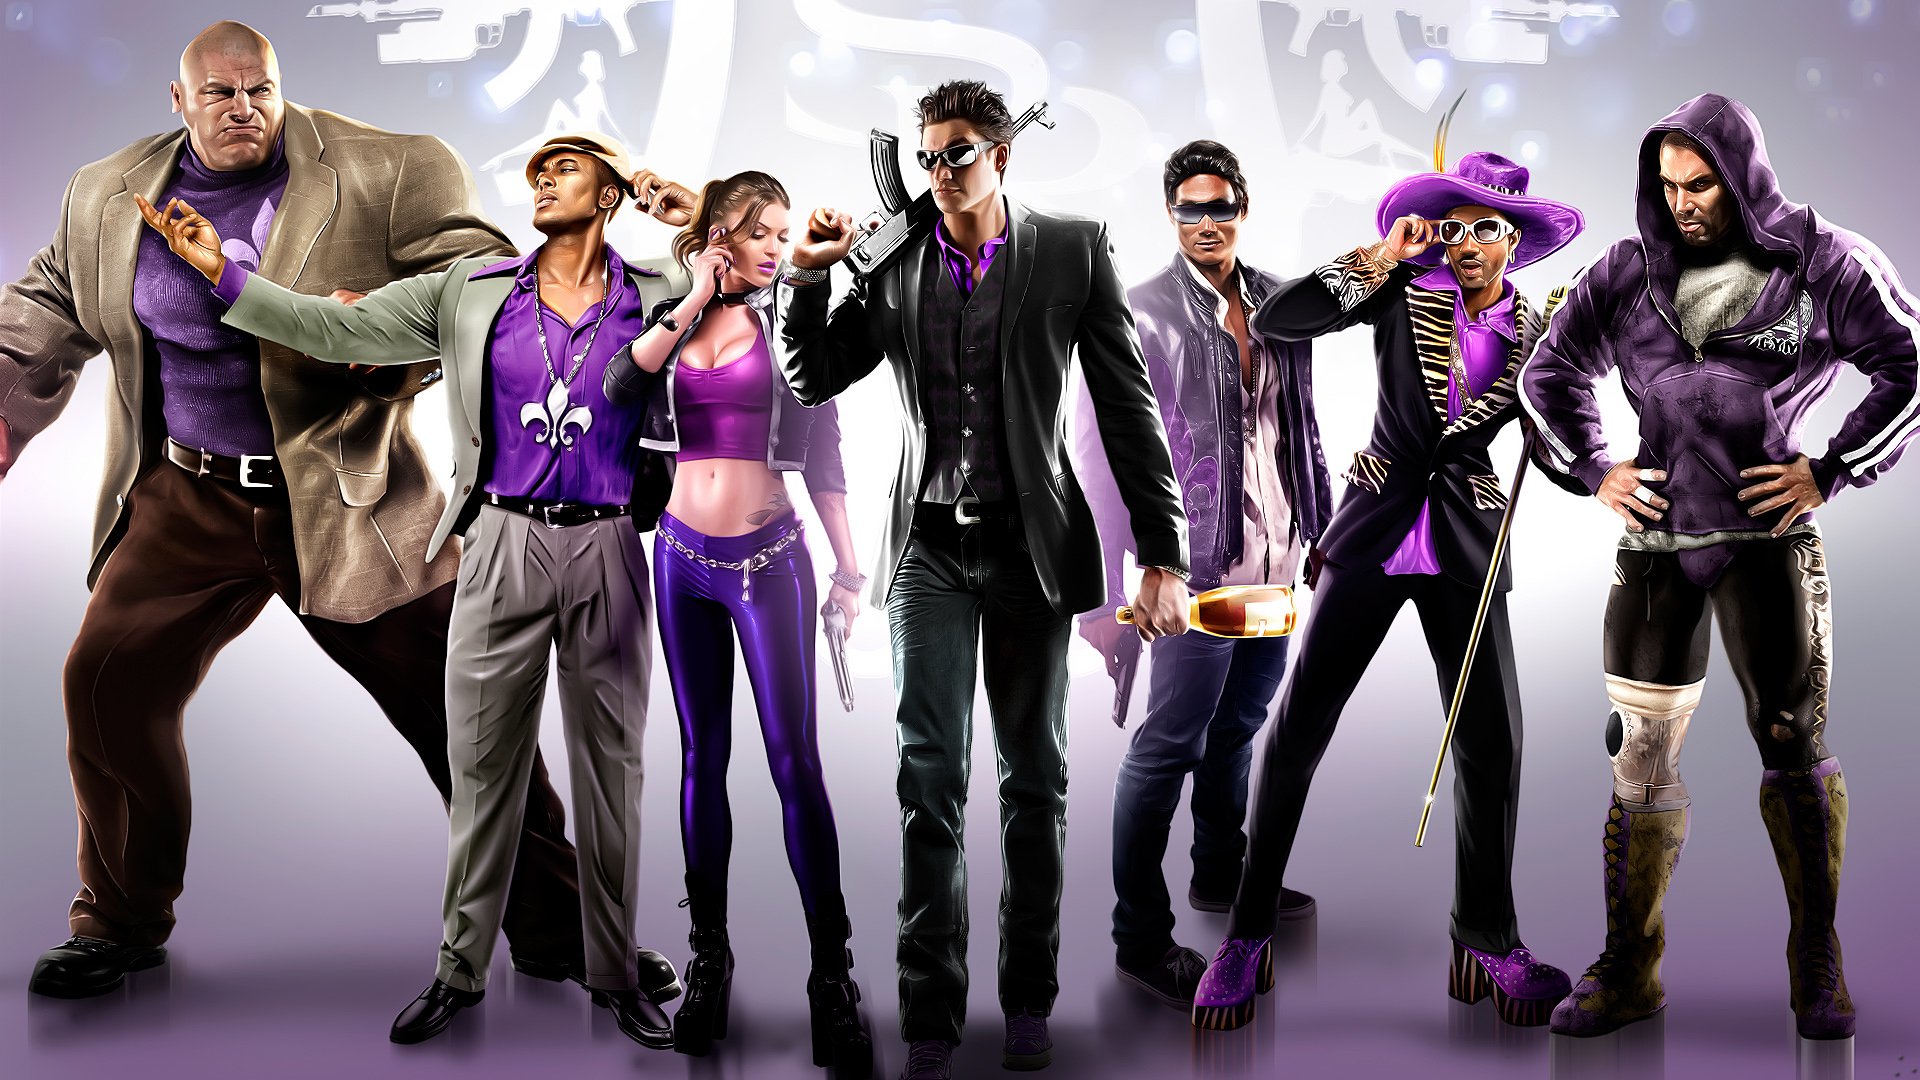 Saints Row The Third HD Wallpaper Background Image